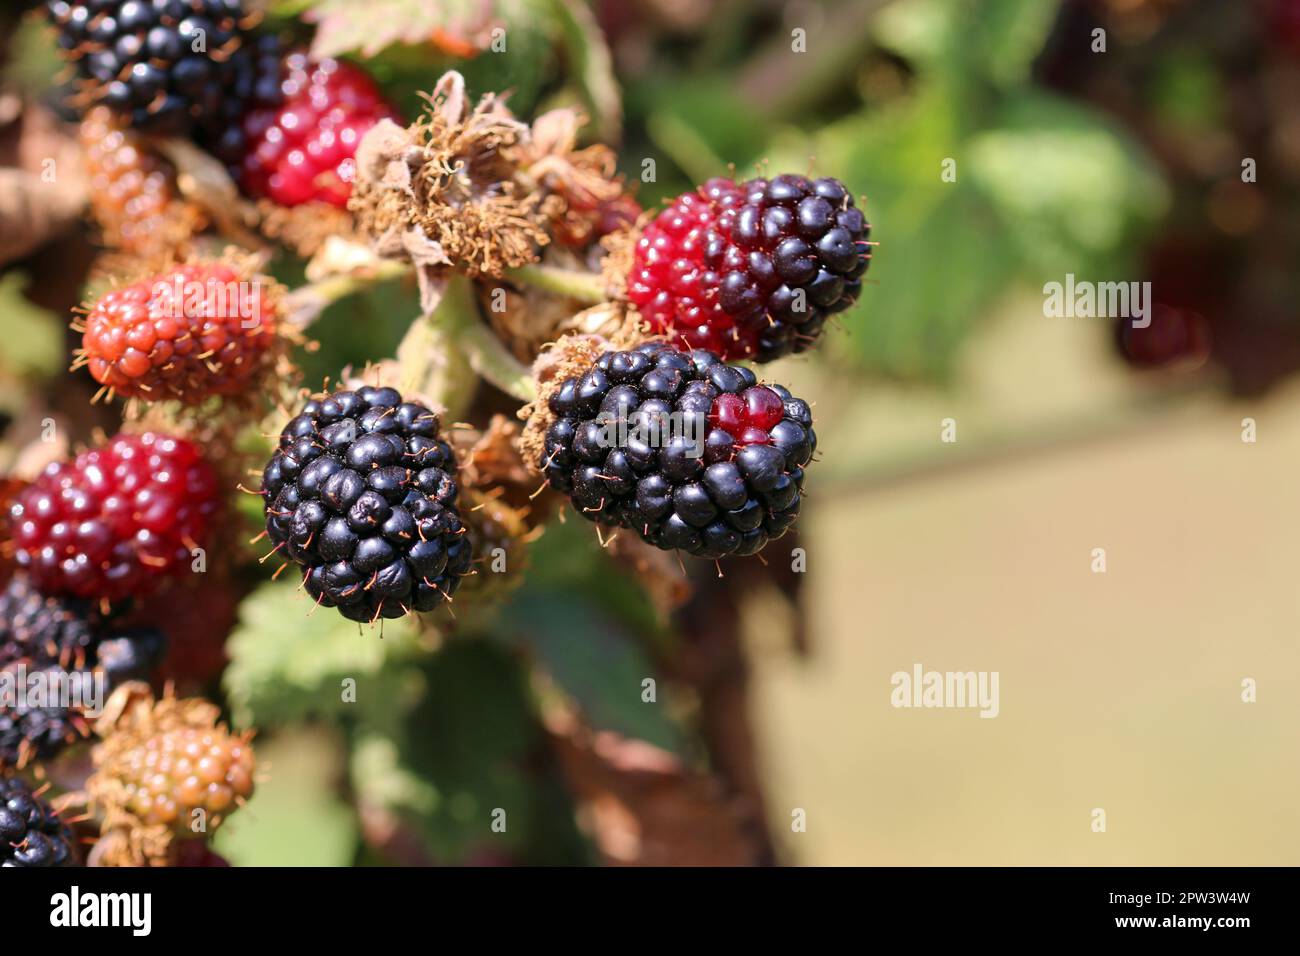 Cultivated ripe and unripe black and red blackberry, Rubus, fruits in close up, on the bush with a background of blurred leaves. Stock Photo